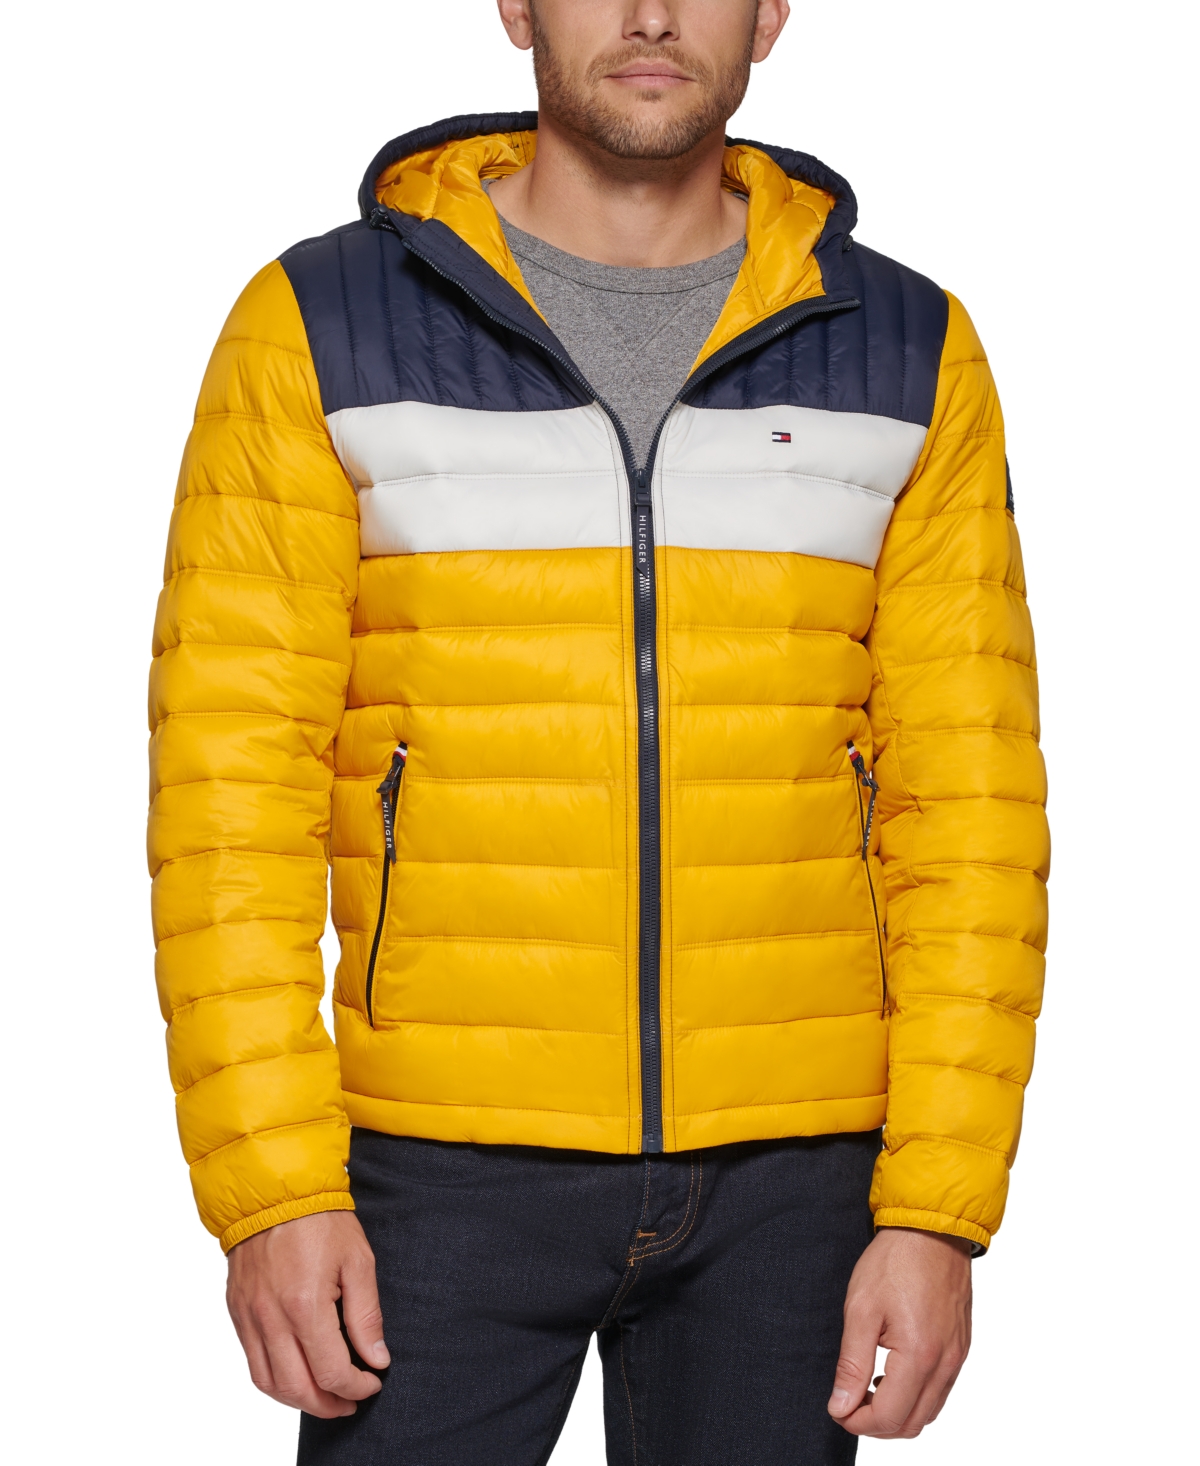 Tommy Hilfiger Classic Puffer Jacket, $195, Macy's